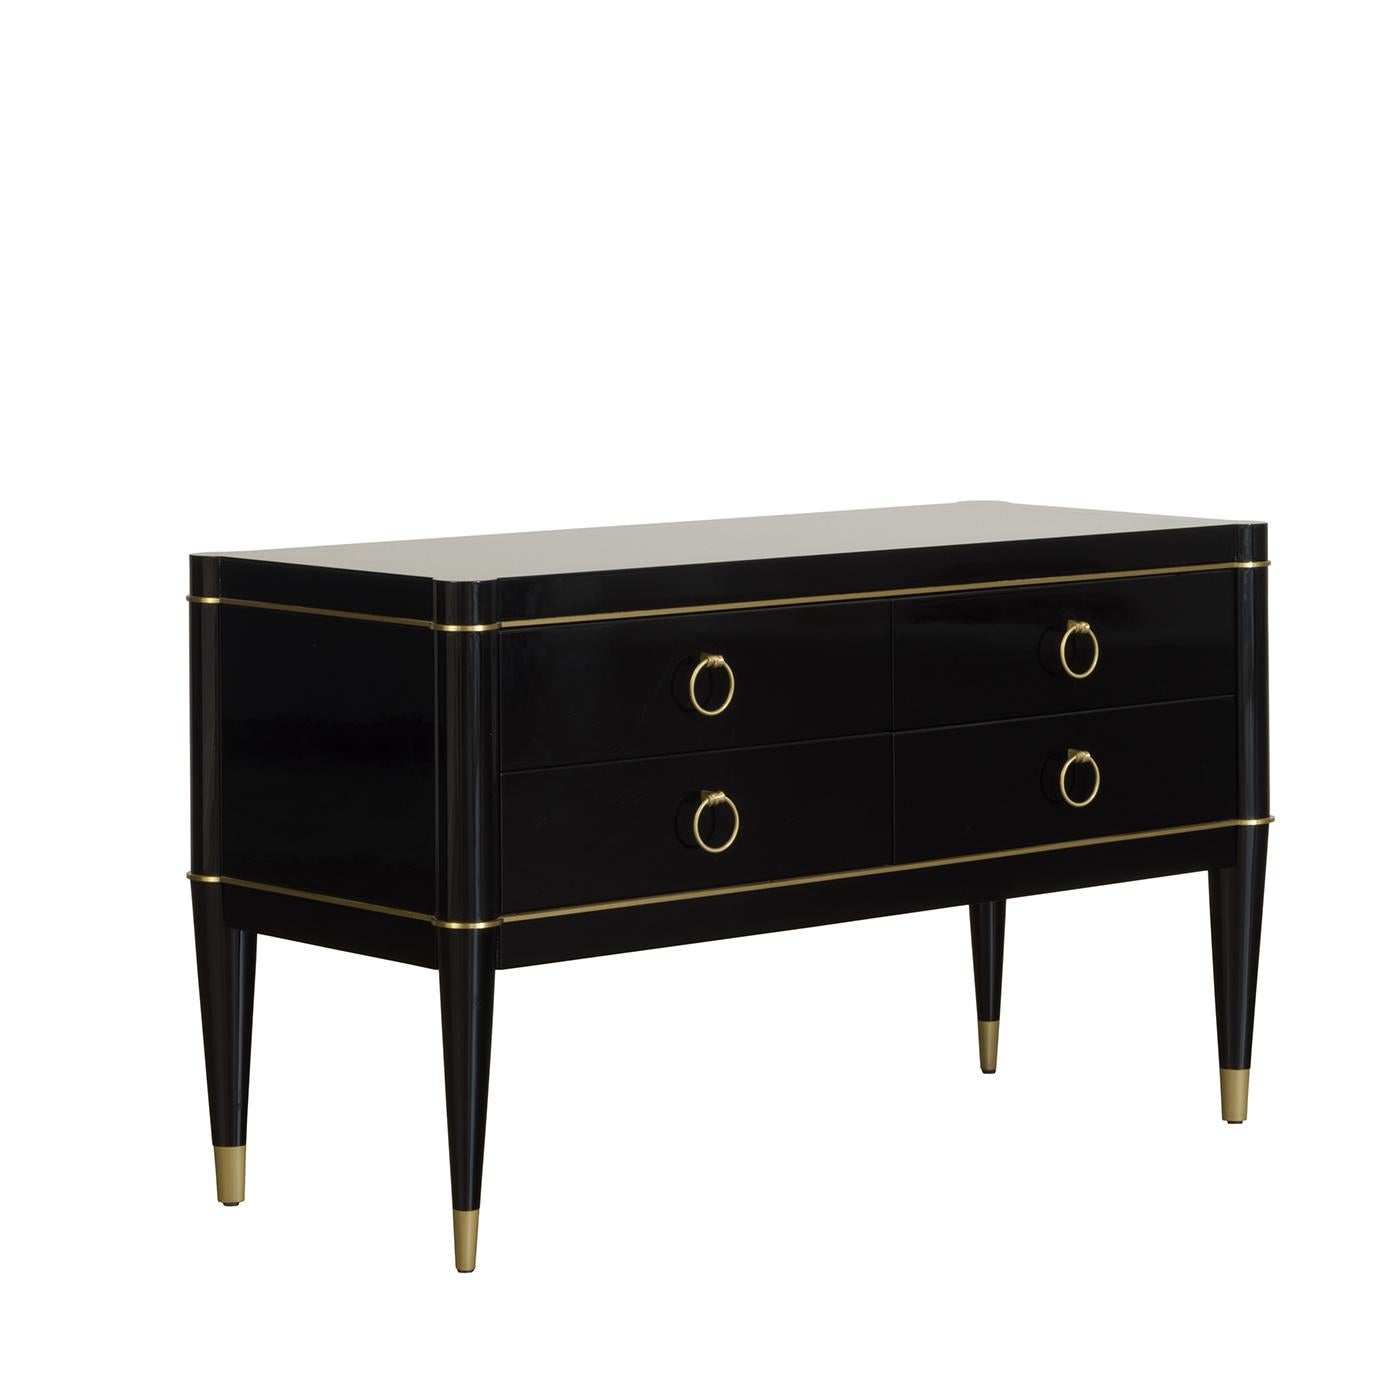 This stunning sideboard will add a glamorous, retro-chic charm to a Classic or modern interior, used as console in an entryway or as a display or storage space in a living room, private study or dining room. Its linear shape is crafted of solid wood